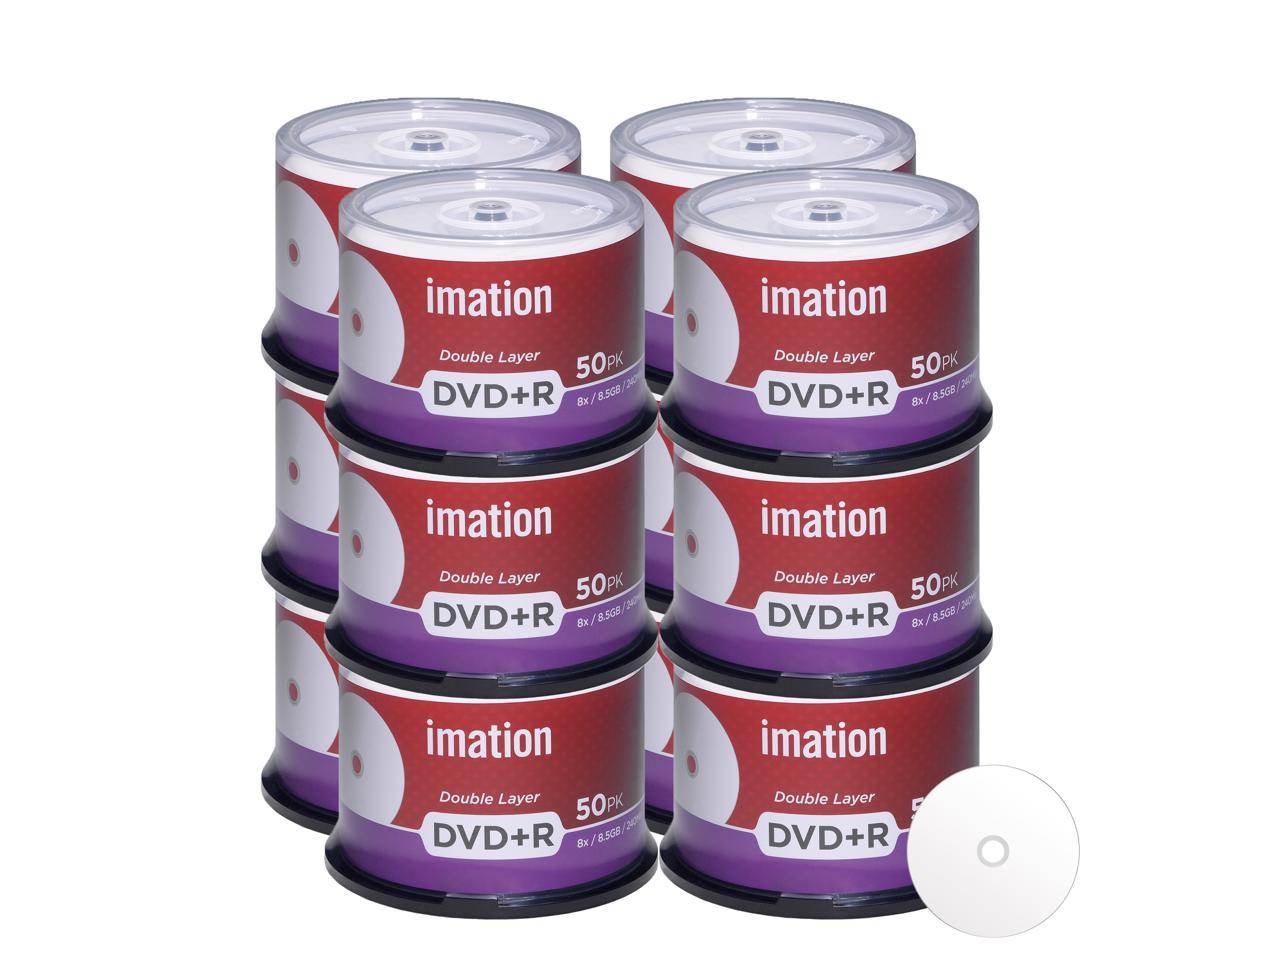 Imation Dvd R Dl Dual Layer 8x 8 5gb Dvd Plus R Double Layer White Inkjet Hub Printable Blank Media Data Movie Game Recordable Disc 600 Pack Newegg Com